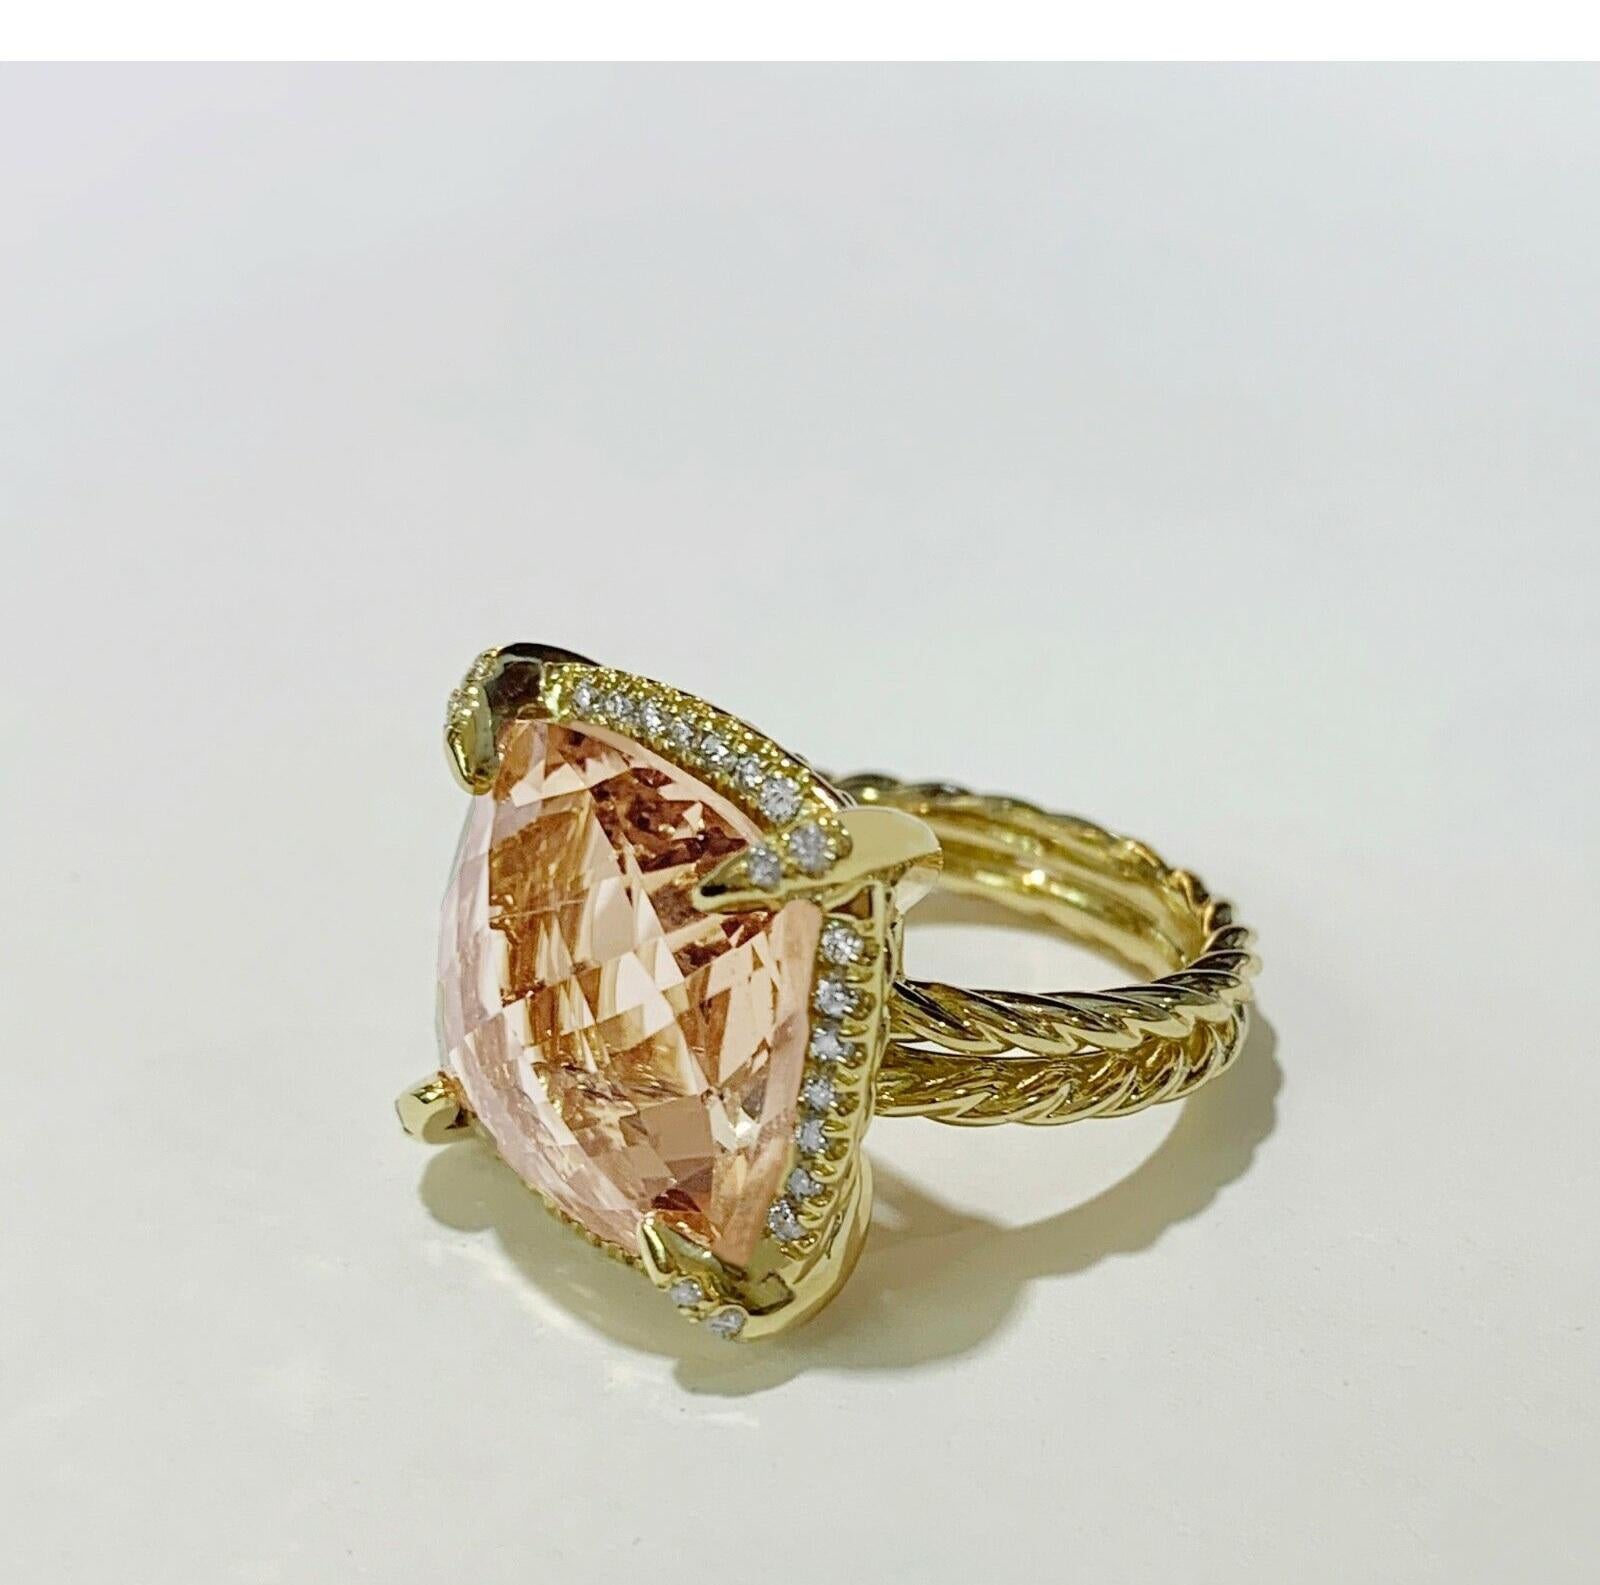 Mint condition
18k Yellow Gold
Ring size: 5.5
Morganite: 14mm
Comes with David Yurman  box
Retail: $5800